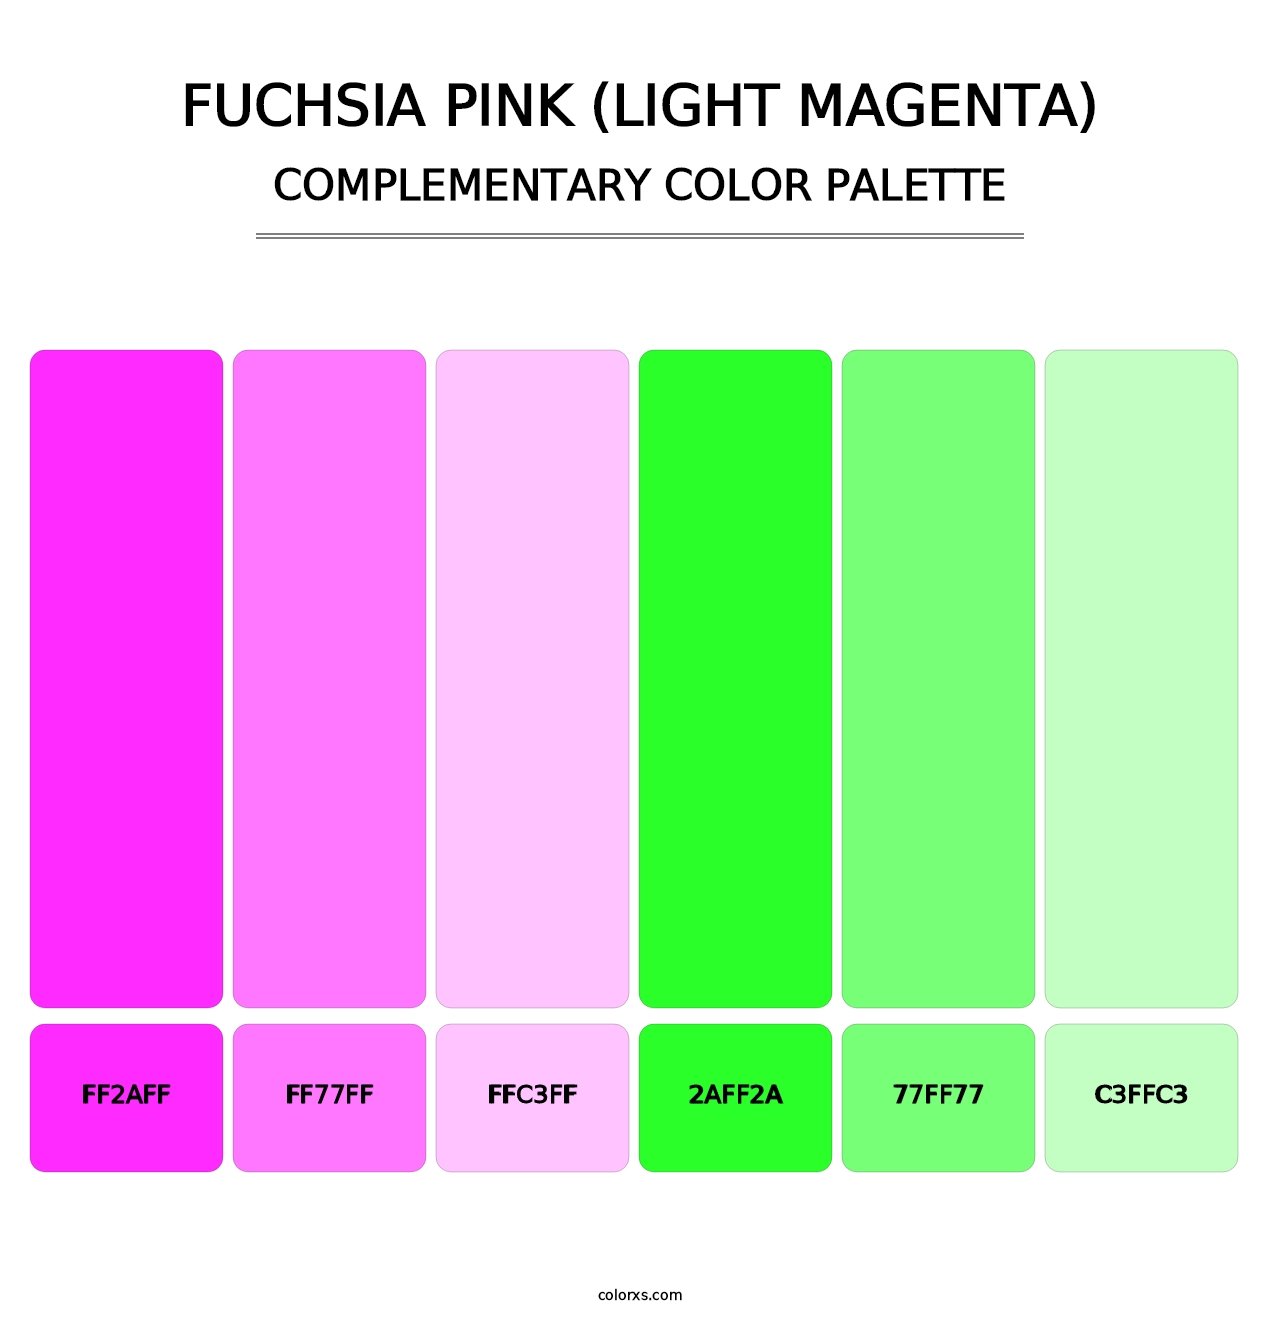 Fuchsia Pink (Light Magenta) - Complementary Color Palette